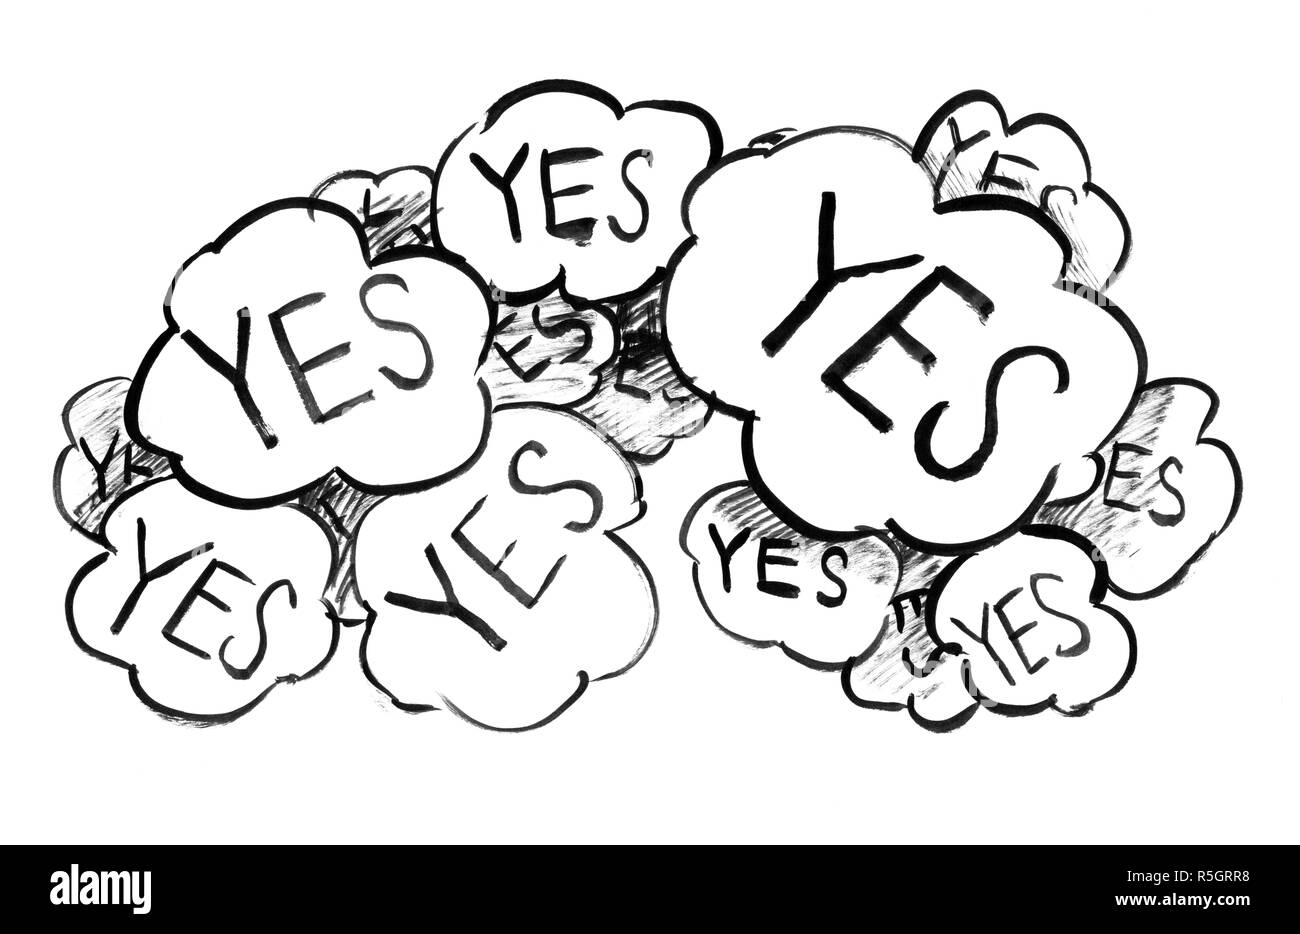 Black Ink Grunge Hand Drawing of Speech Bubbles With Word Yes Stock Photo